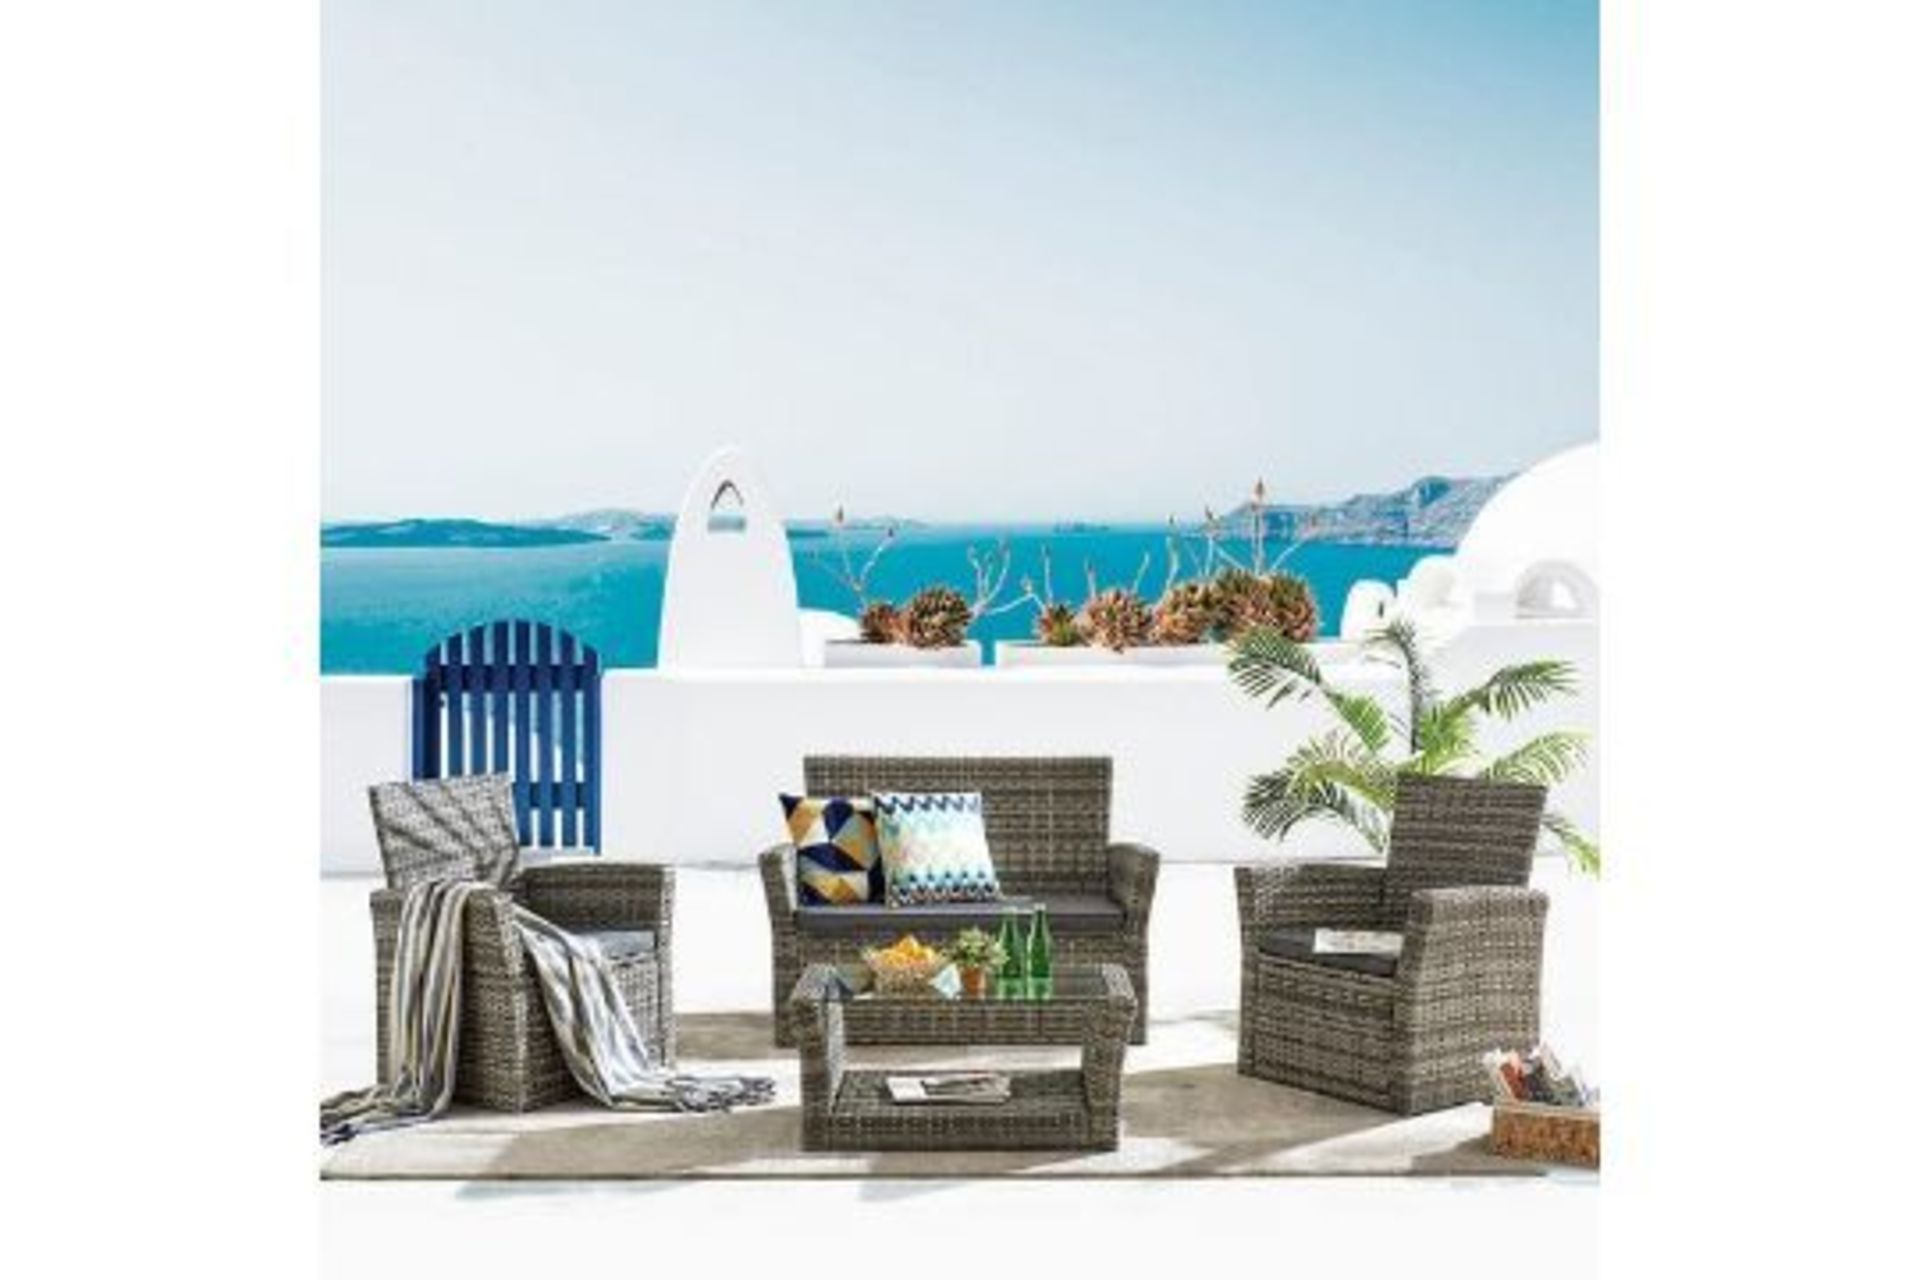 New Boxed Corfo 4 Seater Garden Furniture Set in Grey. The 4-piece garden furniture set includes a - Image 4 of 4